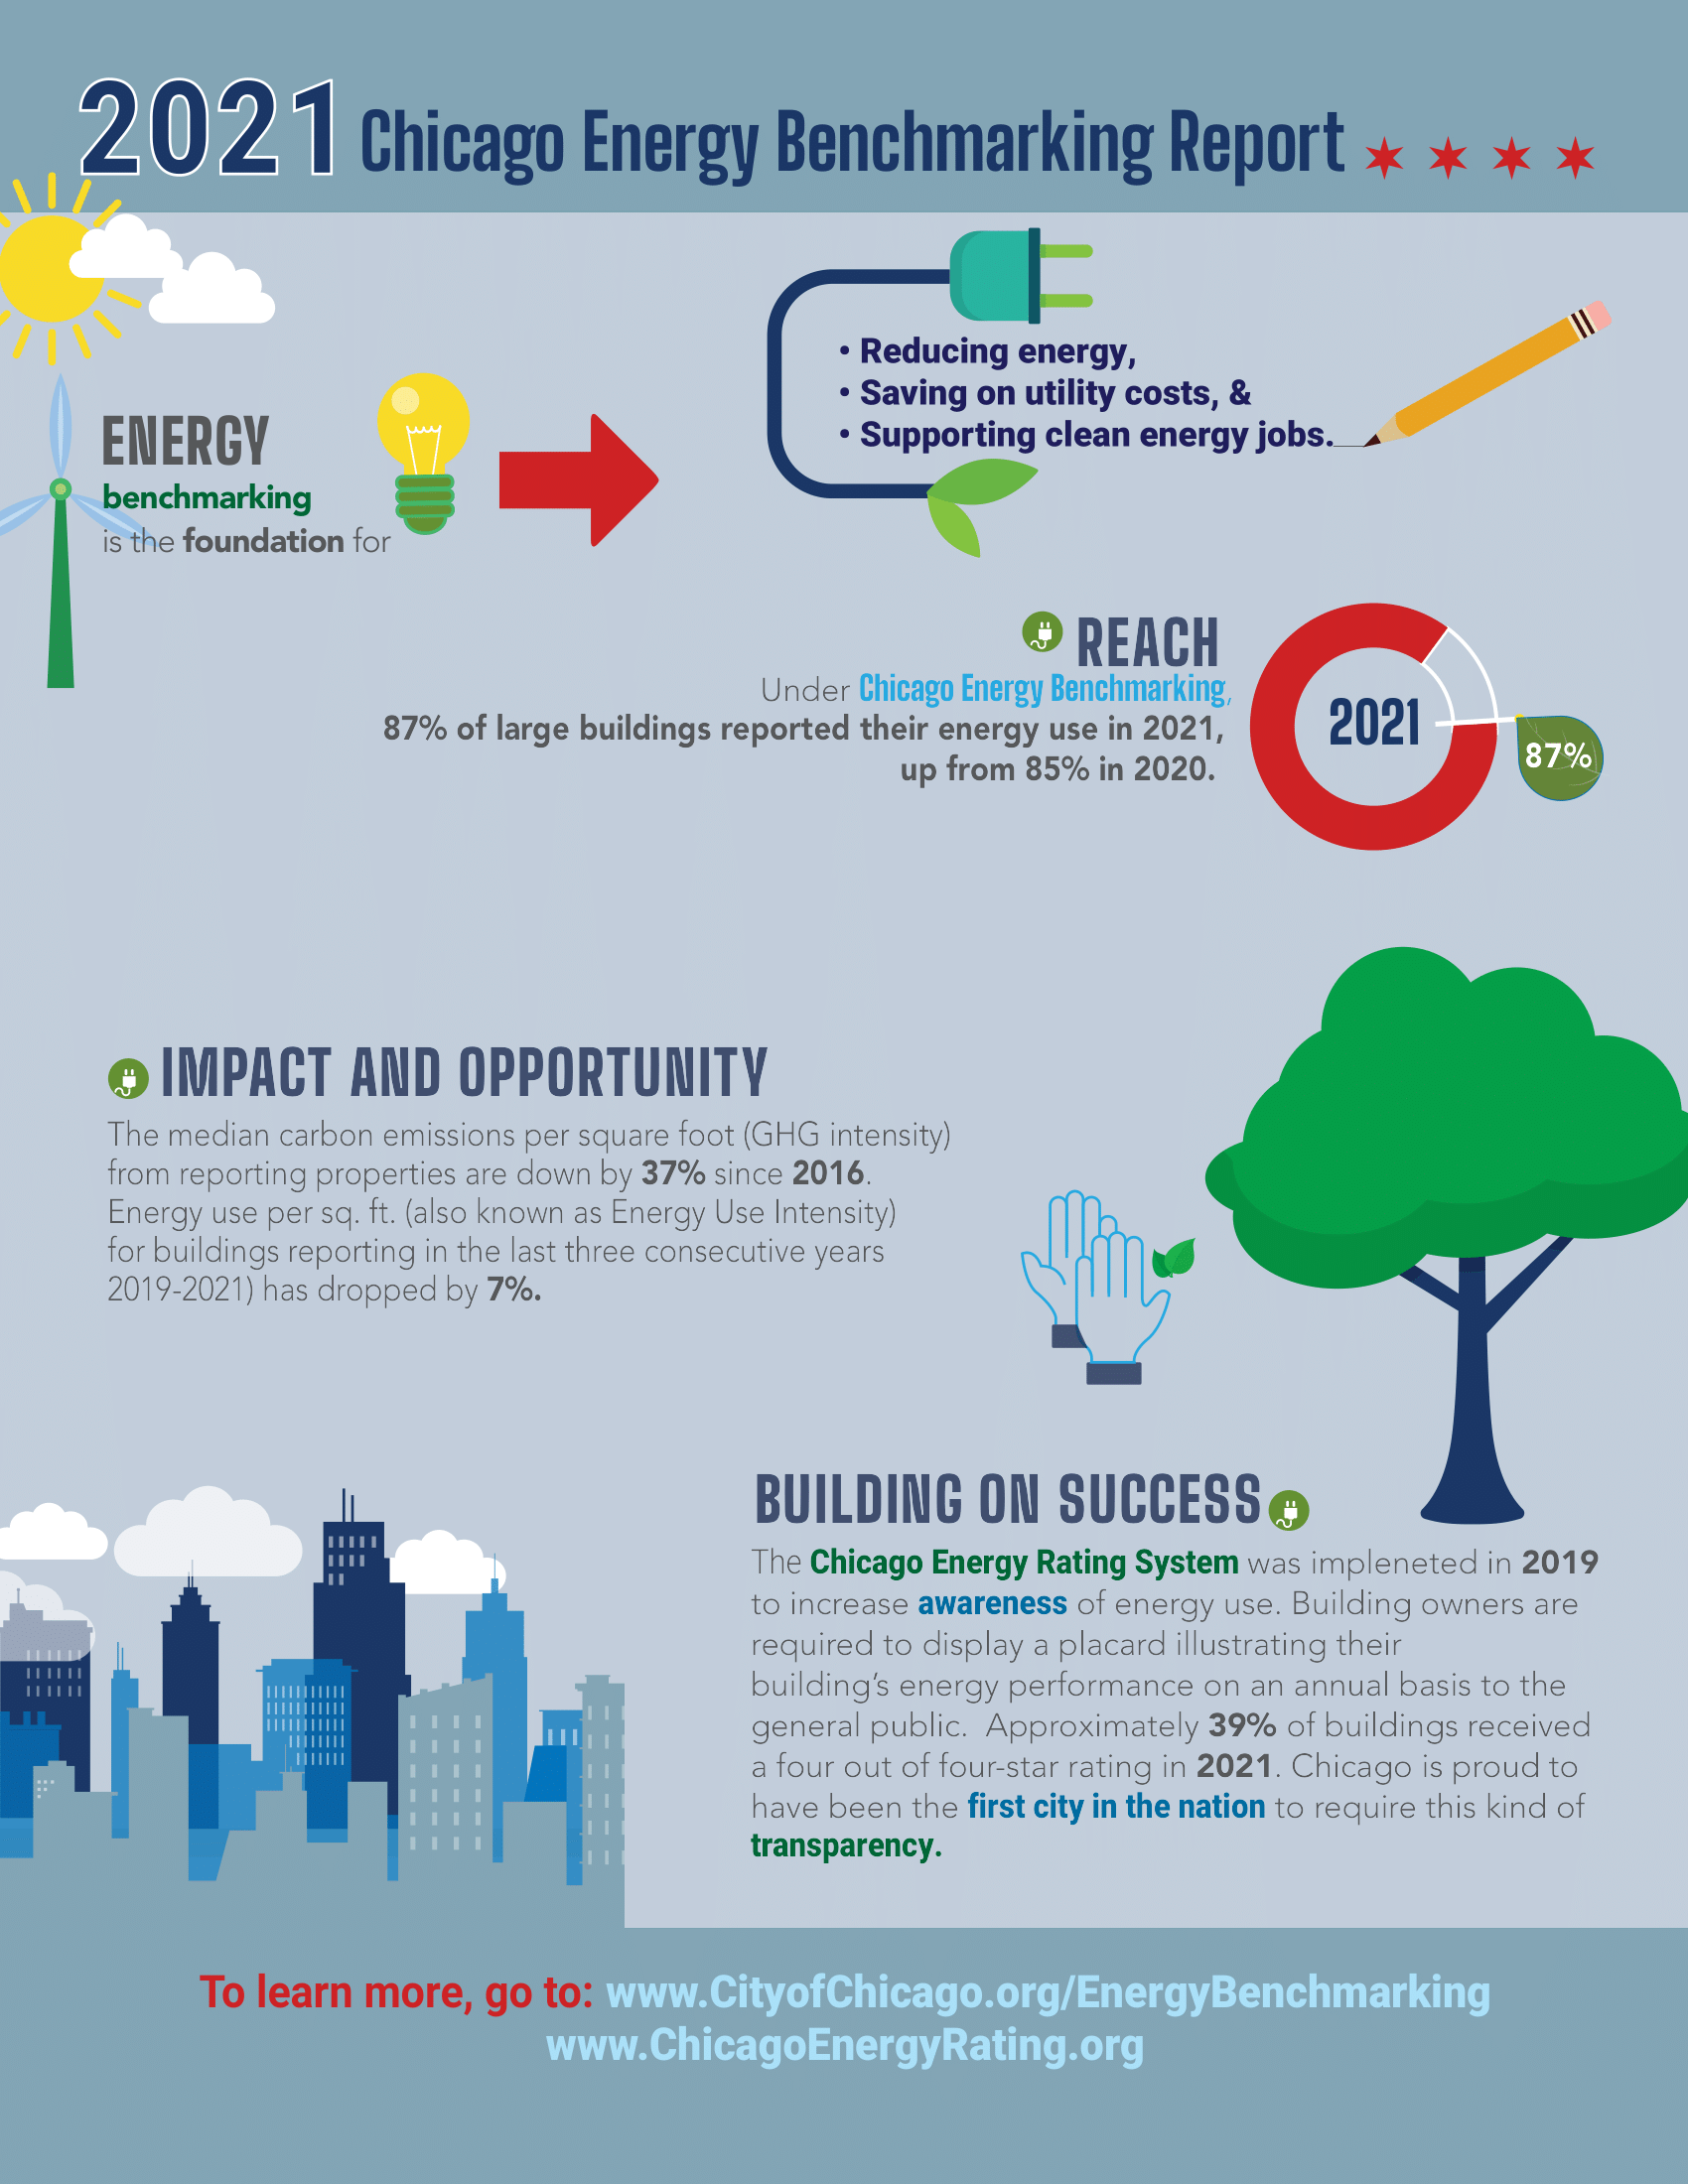 2021 Chicago Energy Benchmarking Report Infographic